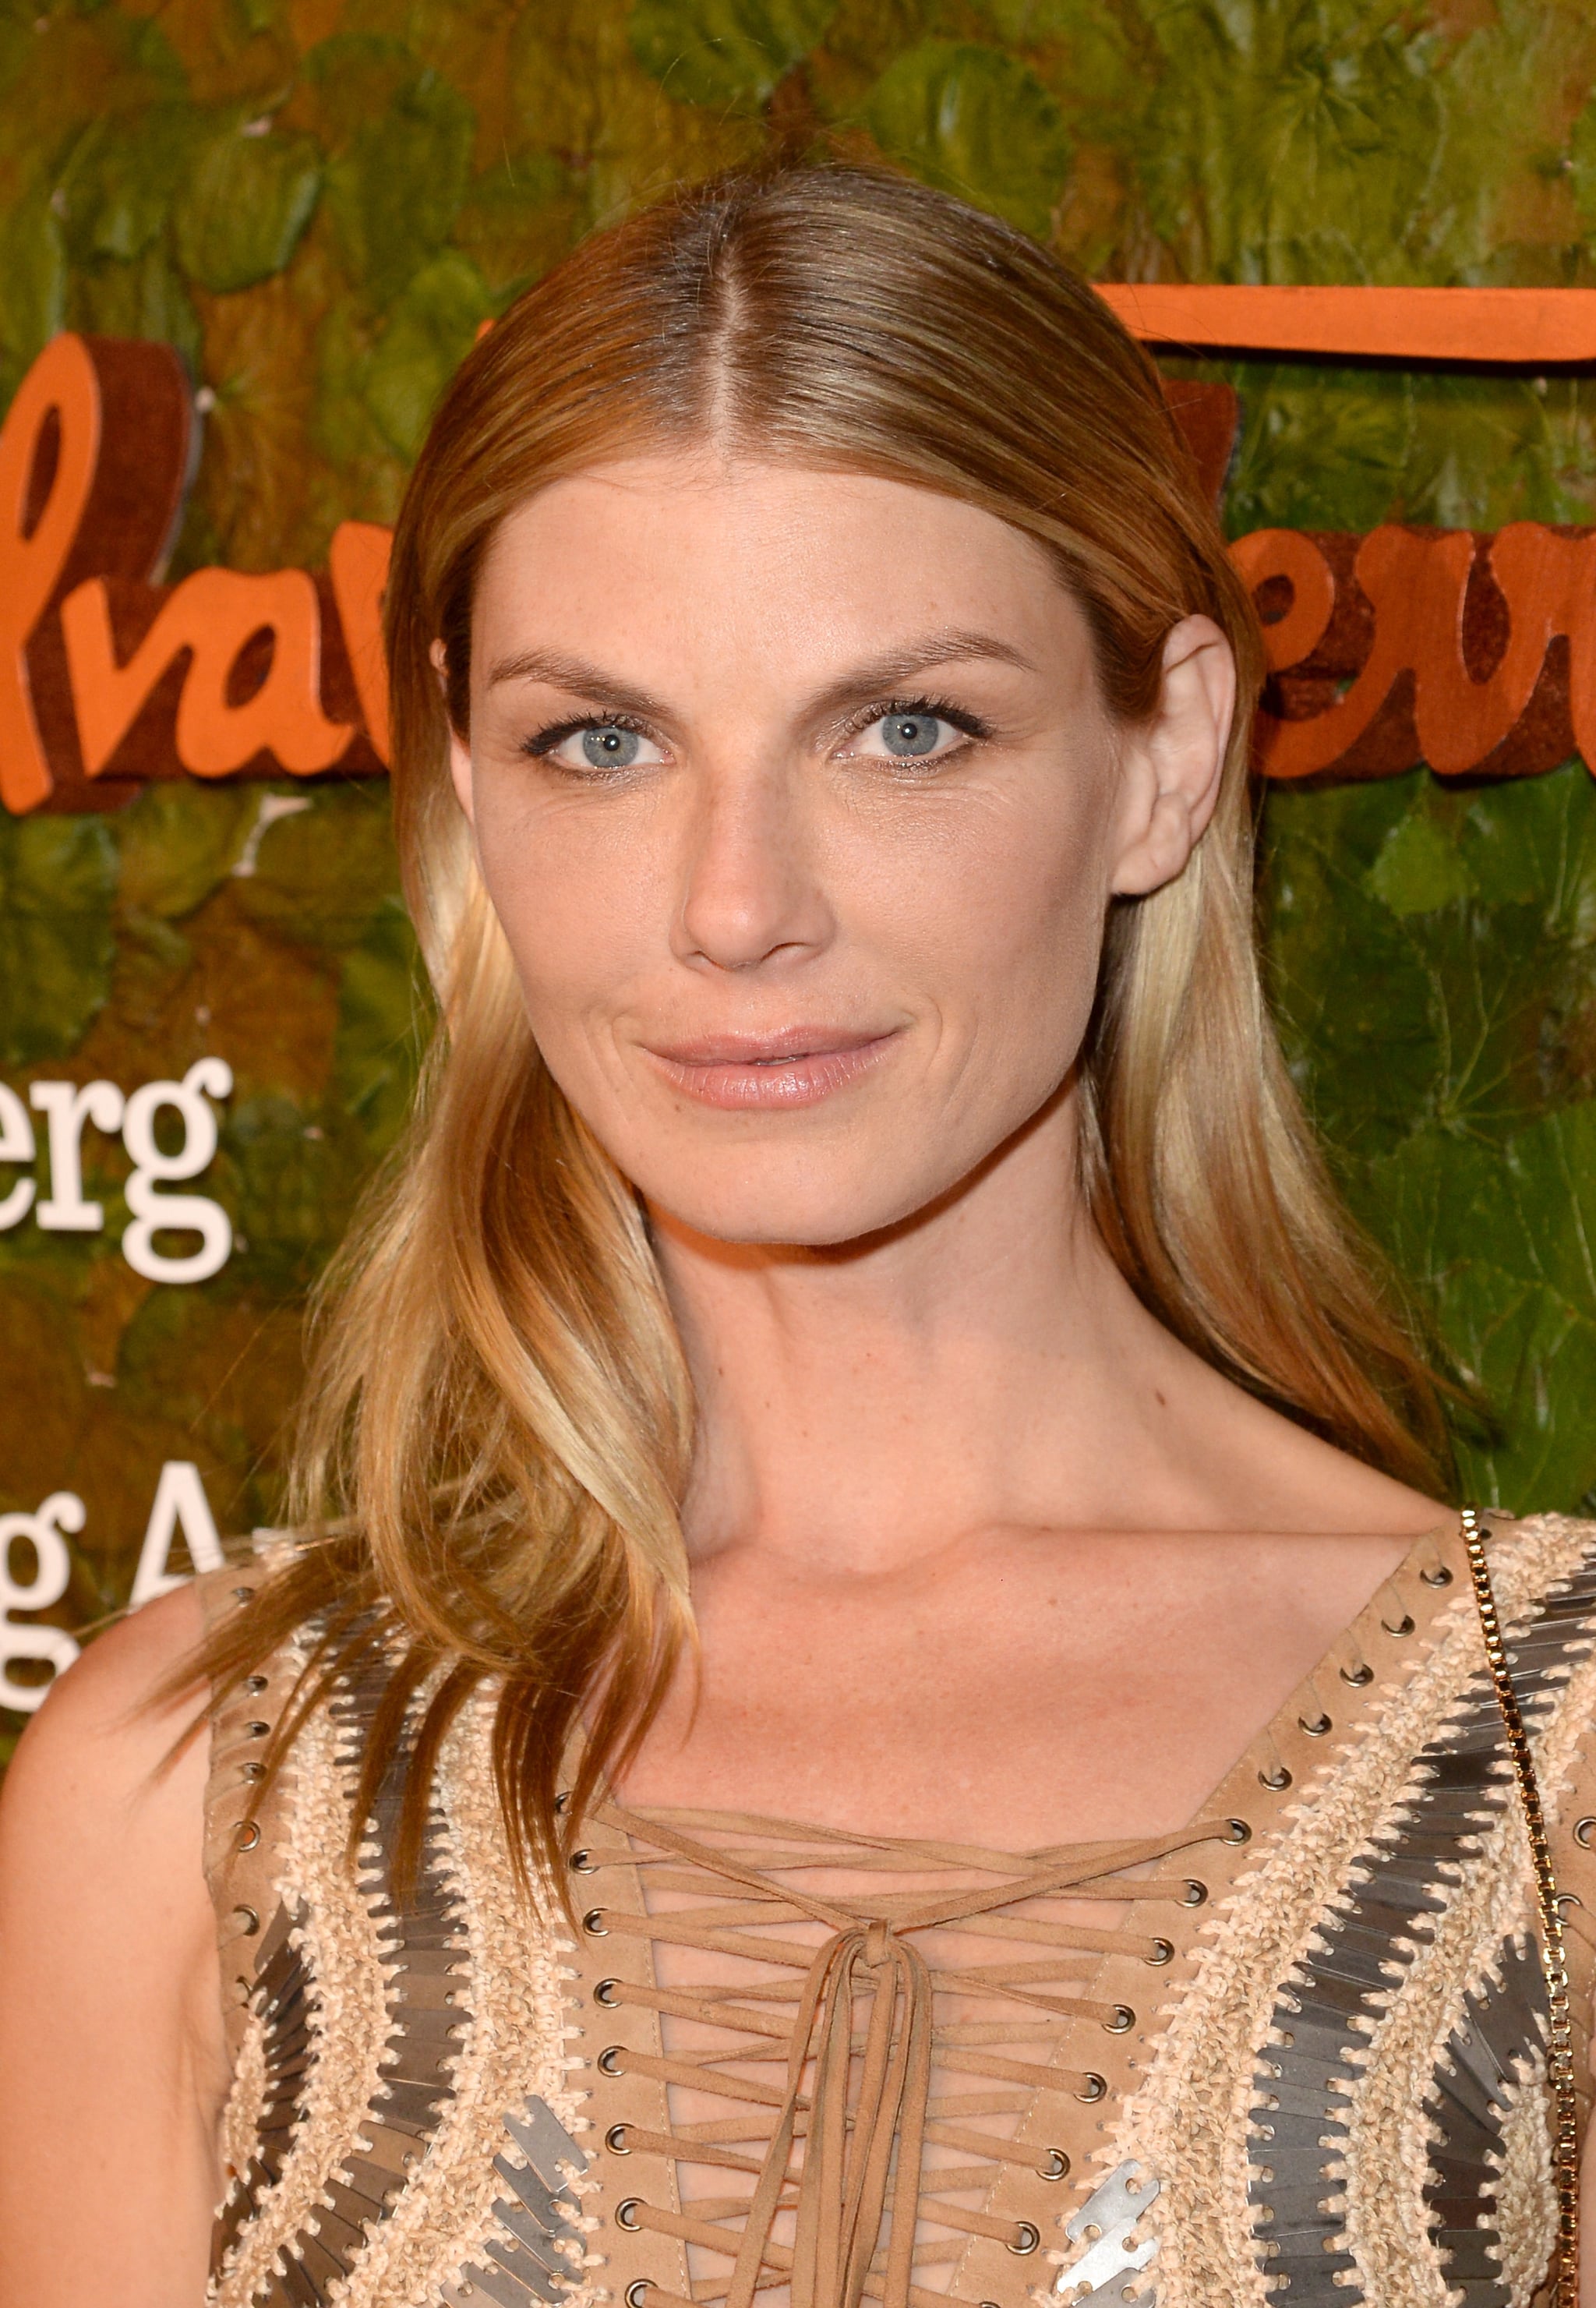 How tall is Angela Lindvall?